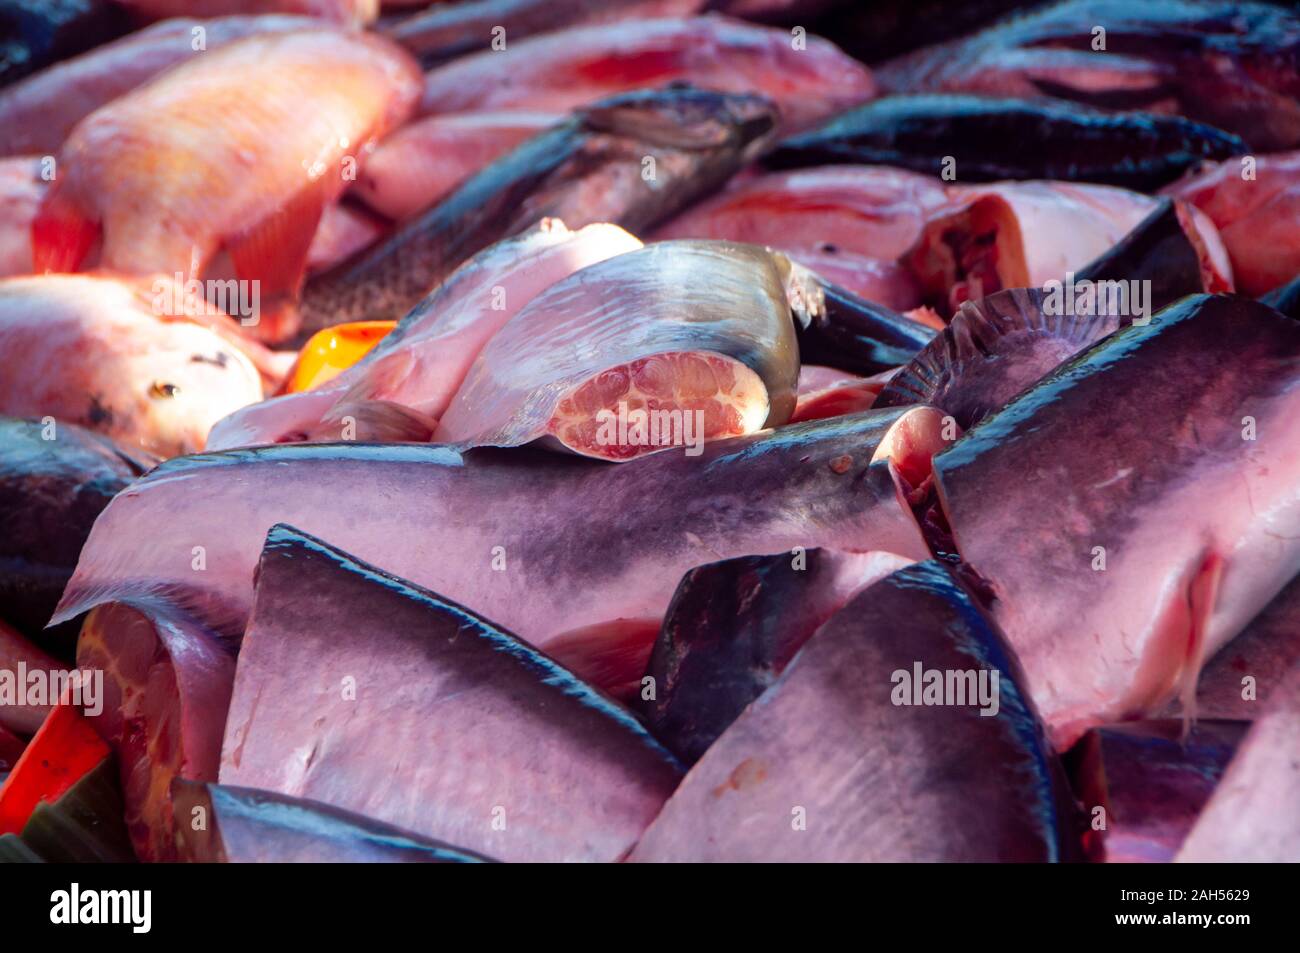 Pile of fillet of fish Pangasius on market stall Stock Photo